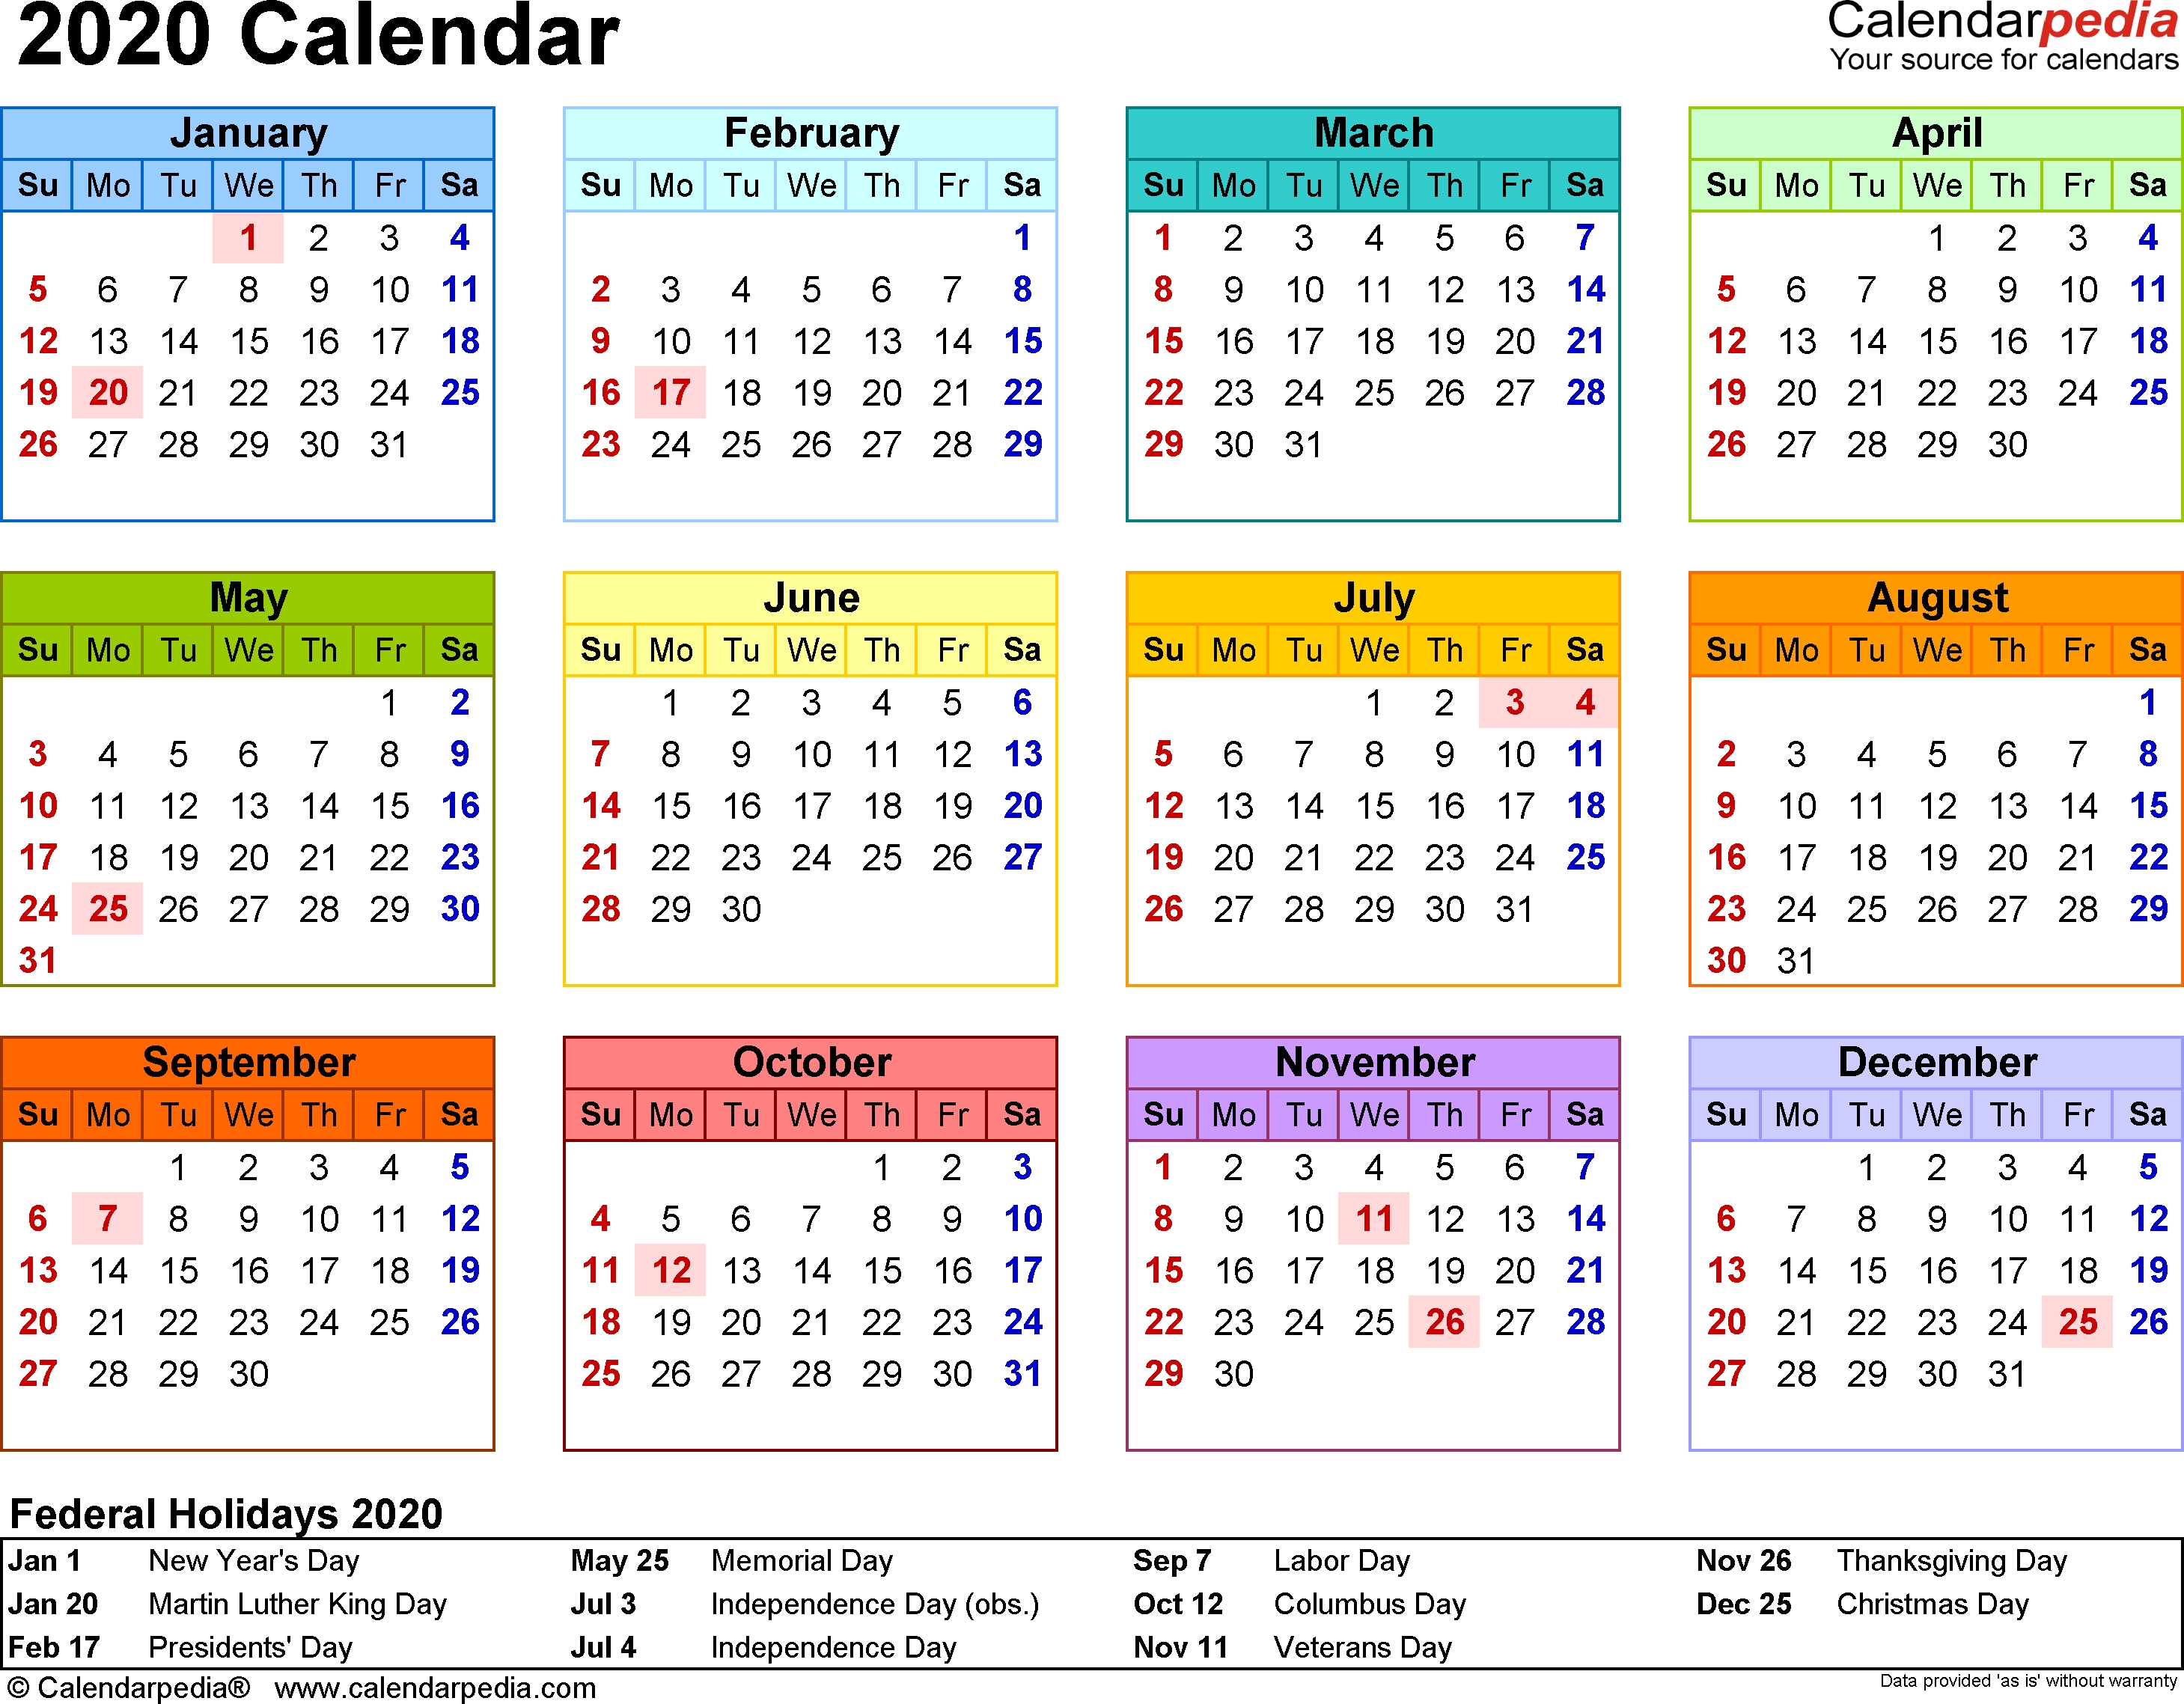 2020 Calendar - Download 17 Free Printable Excel Templates (.xlsx) 2020 Calendar South Africa With Public Holidays